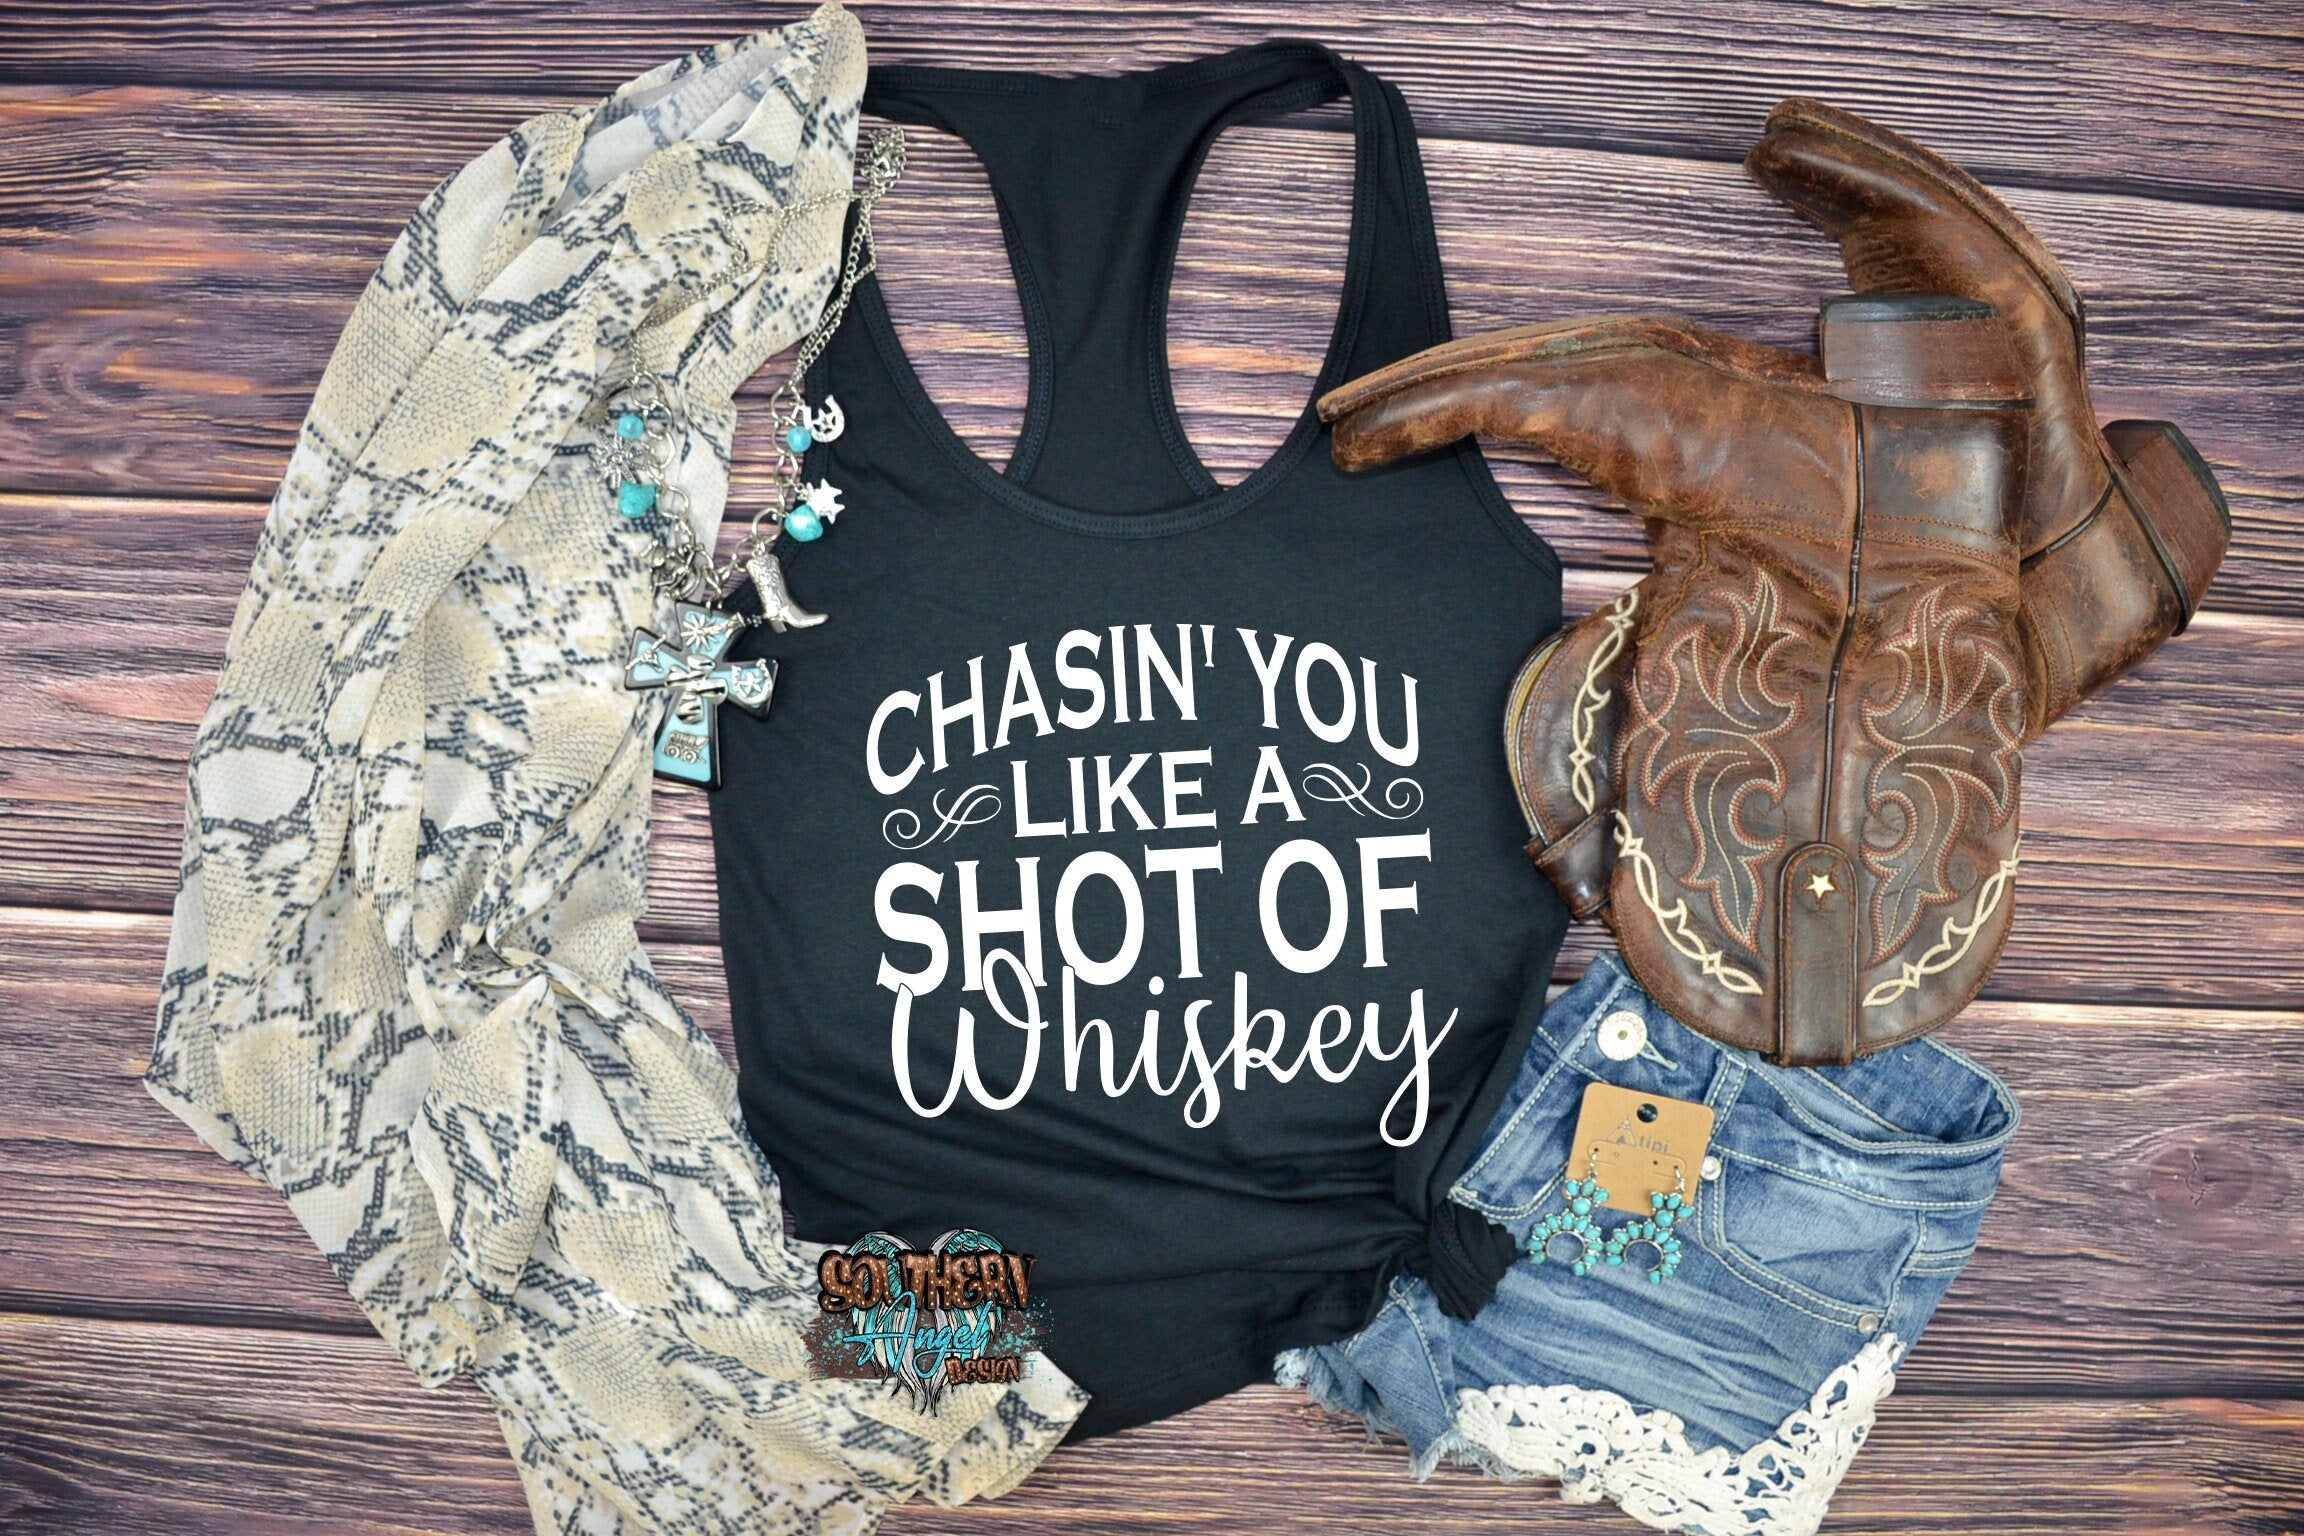 Chasin’ You Like A Shot tank | Chasin’ you tank | Country music shirt | Country Thunder | Country concert shirt | Country music festival